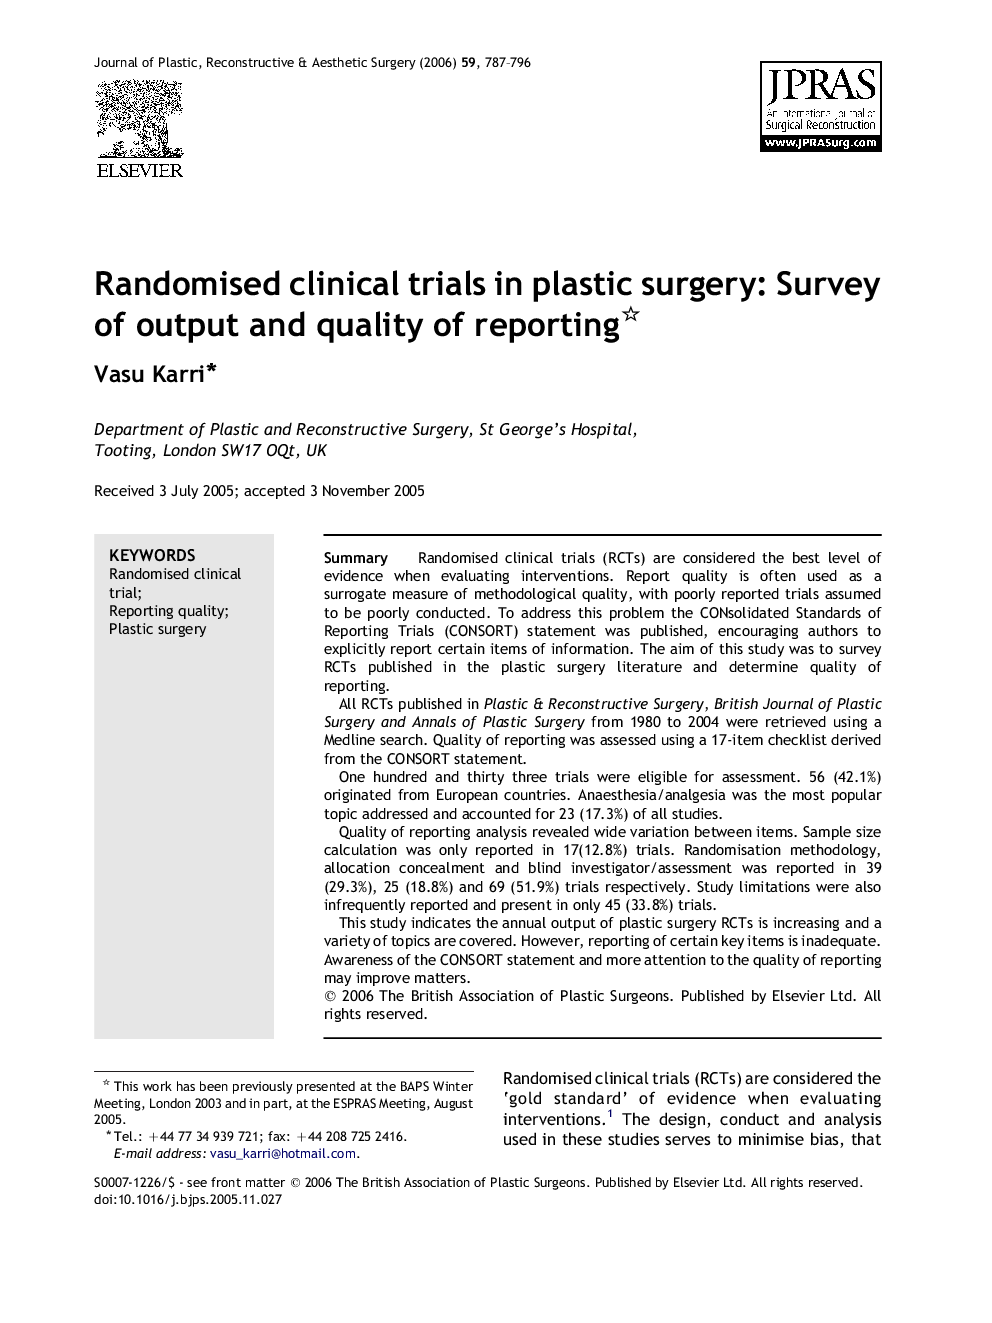 Randomised clinical trials in plastic surgery: Survey of output and quality of reporting 